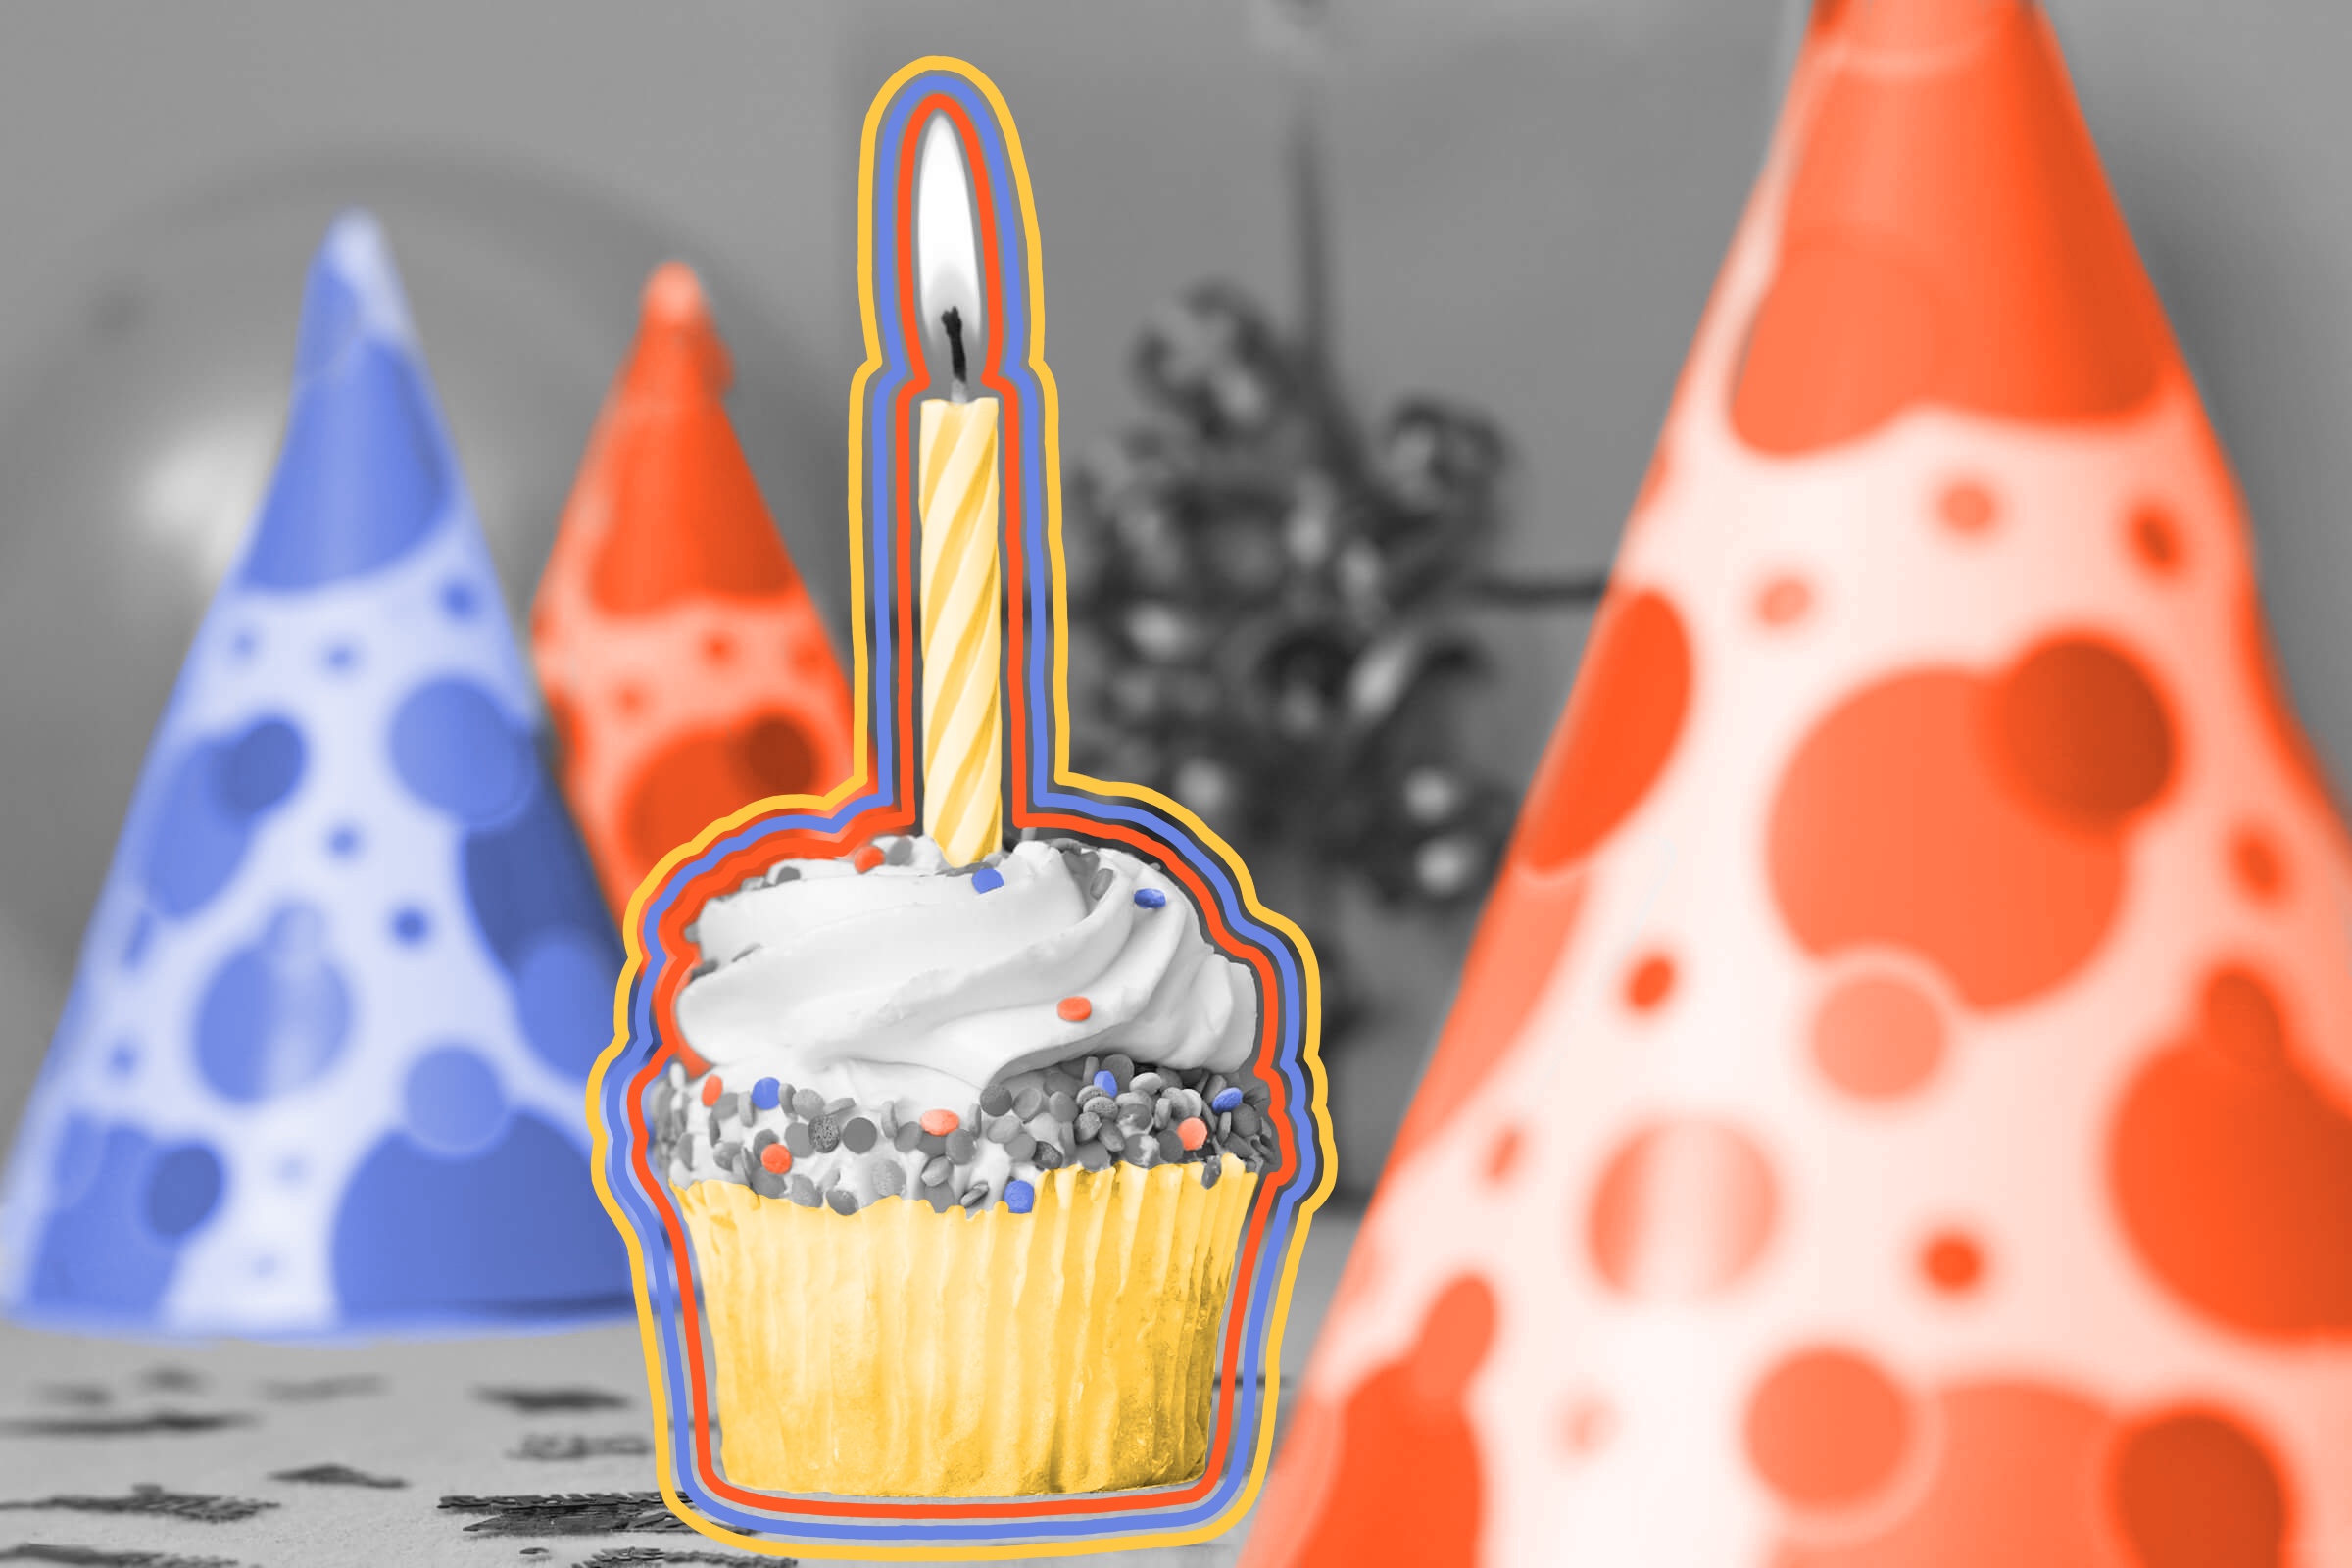 September is the most common month for birthdays in the U.S.